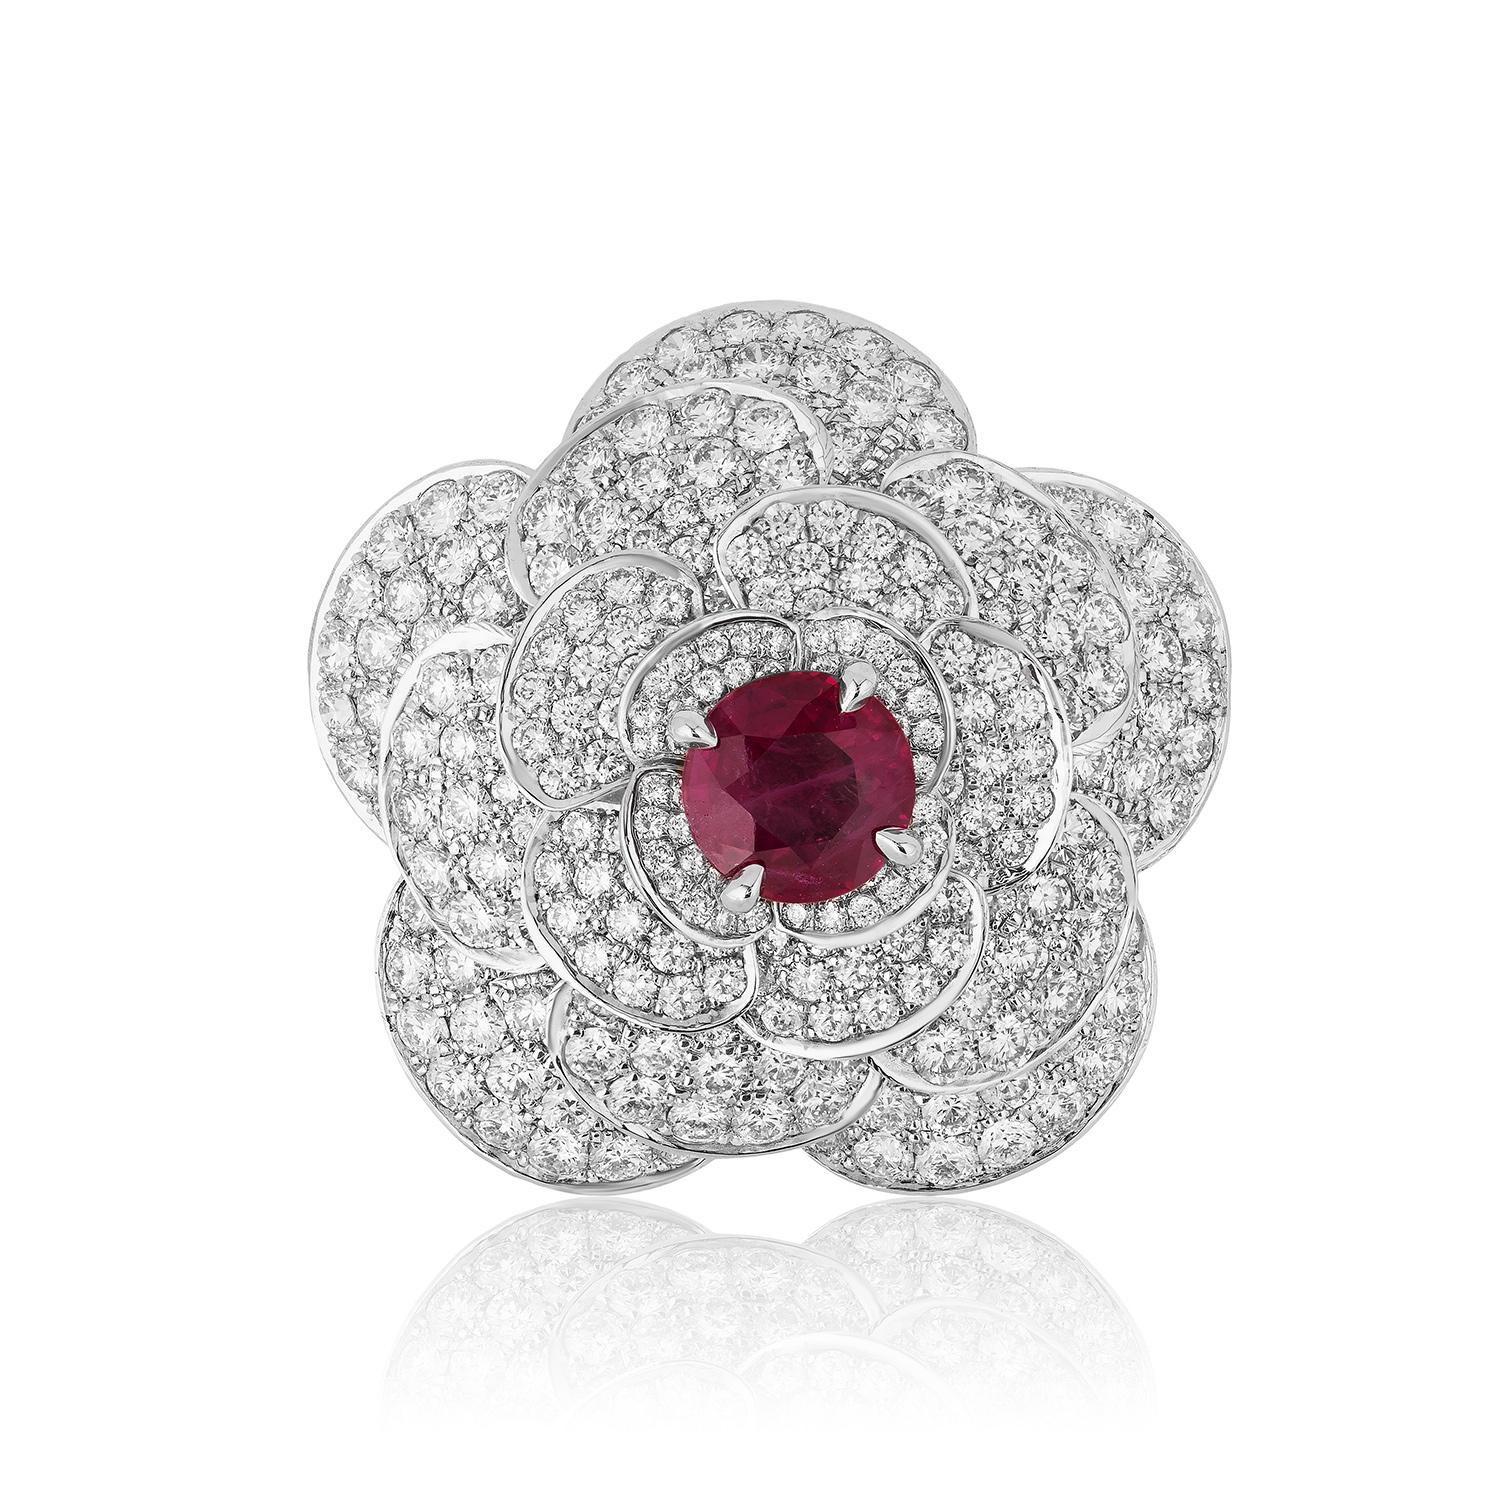 Andreoli 1.68 Carat Ruby Diamond 18 Karat White Gold Flower Ring CDC Certified

This ring features:
- 8.30 Carat Diamond
- 1.68 Carat Ruby Burma Certified
- 28.23 Gram 18K White Gold
- Made In Italy